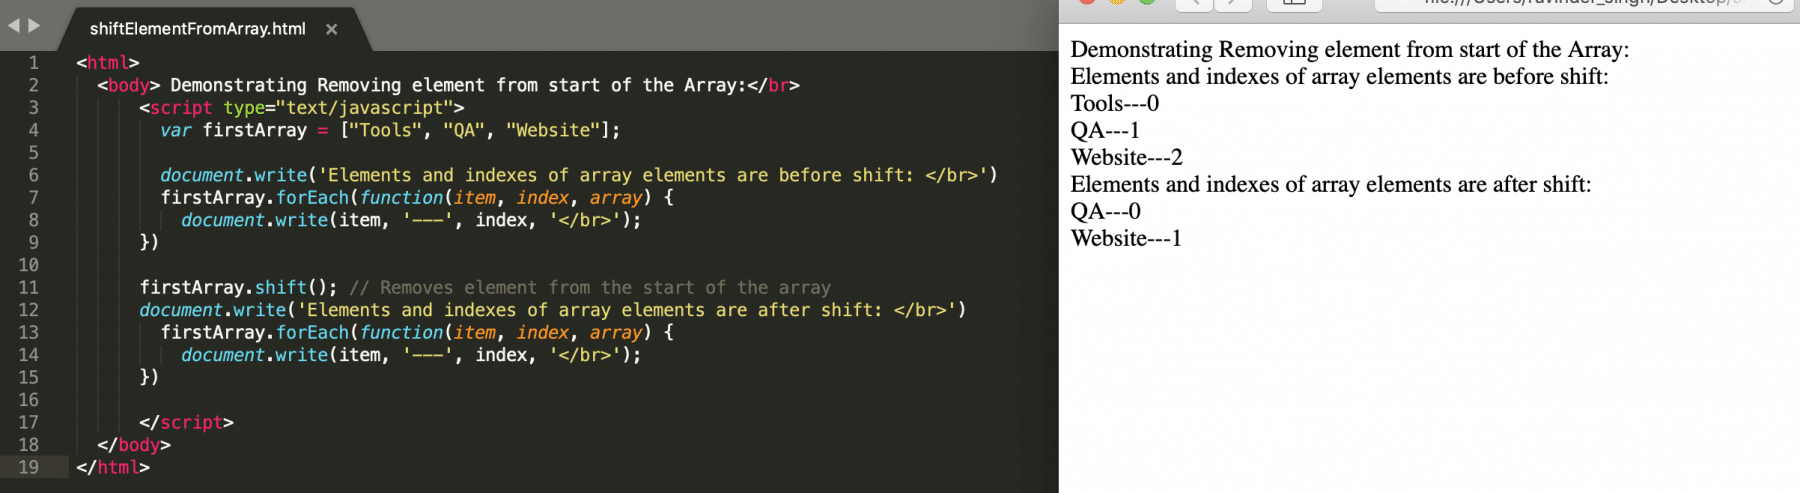 Removing elements from Start of the Array